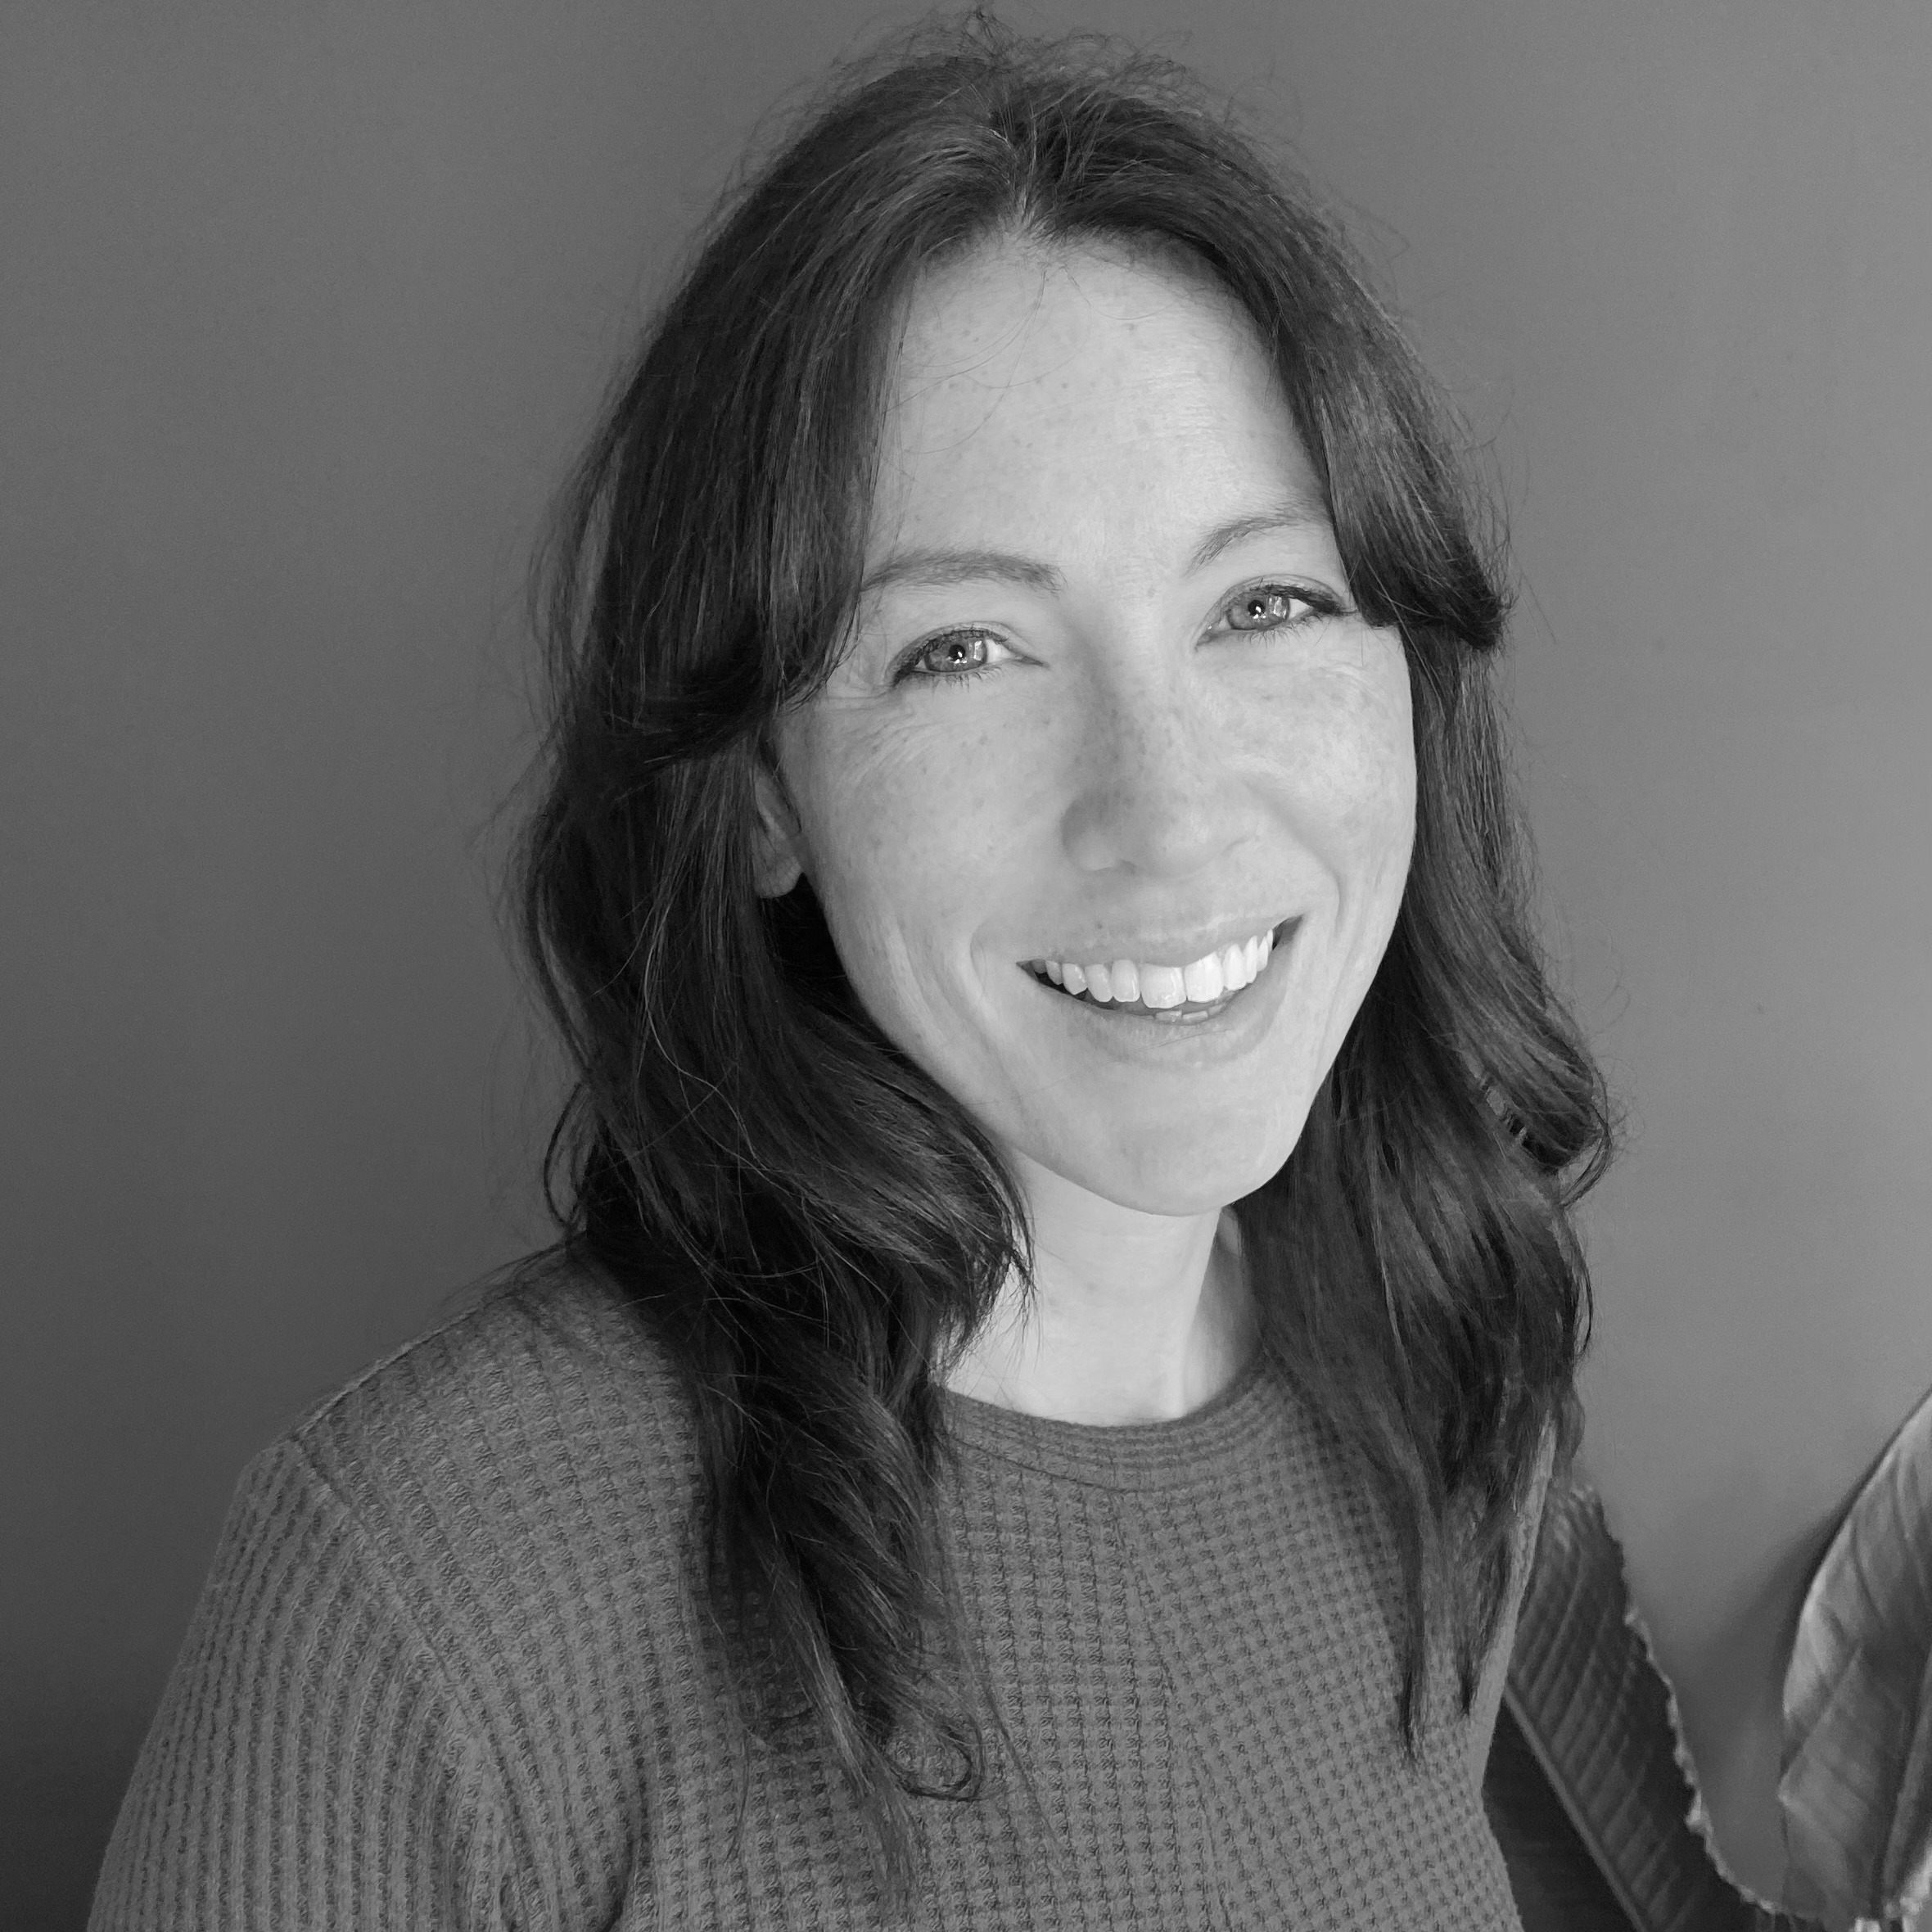 A greyscale image of a smiling person with long dark hair